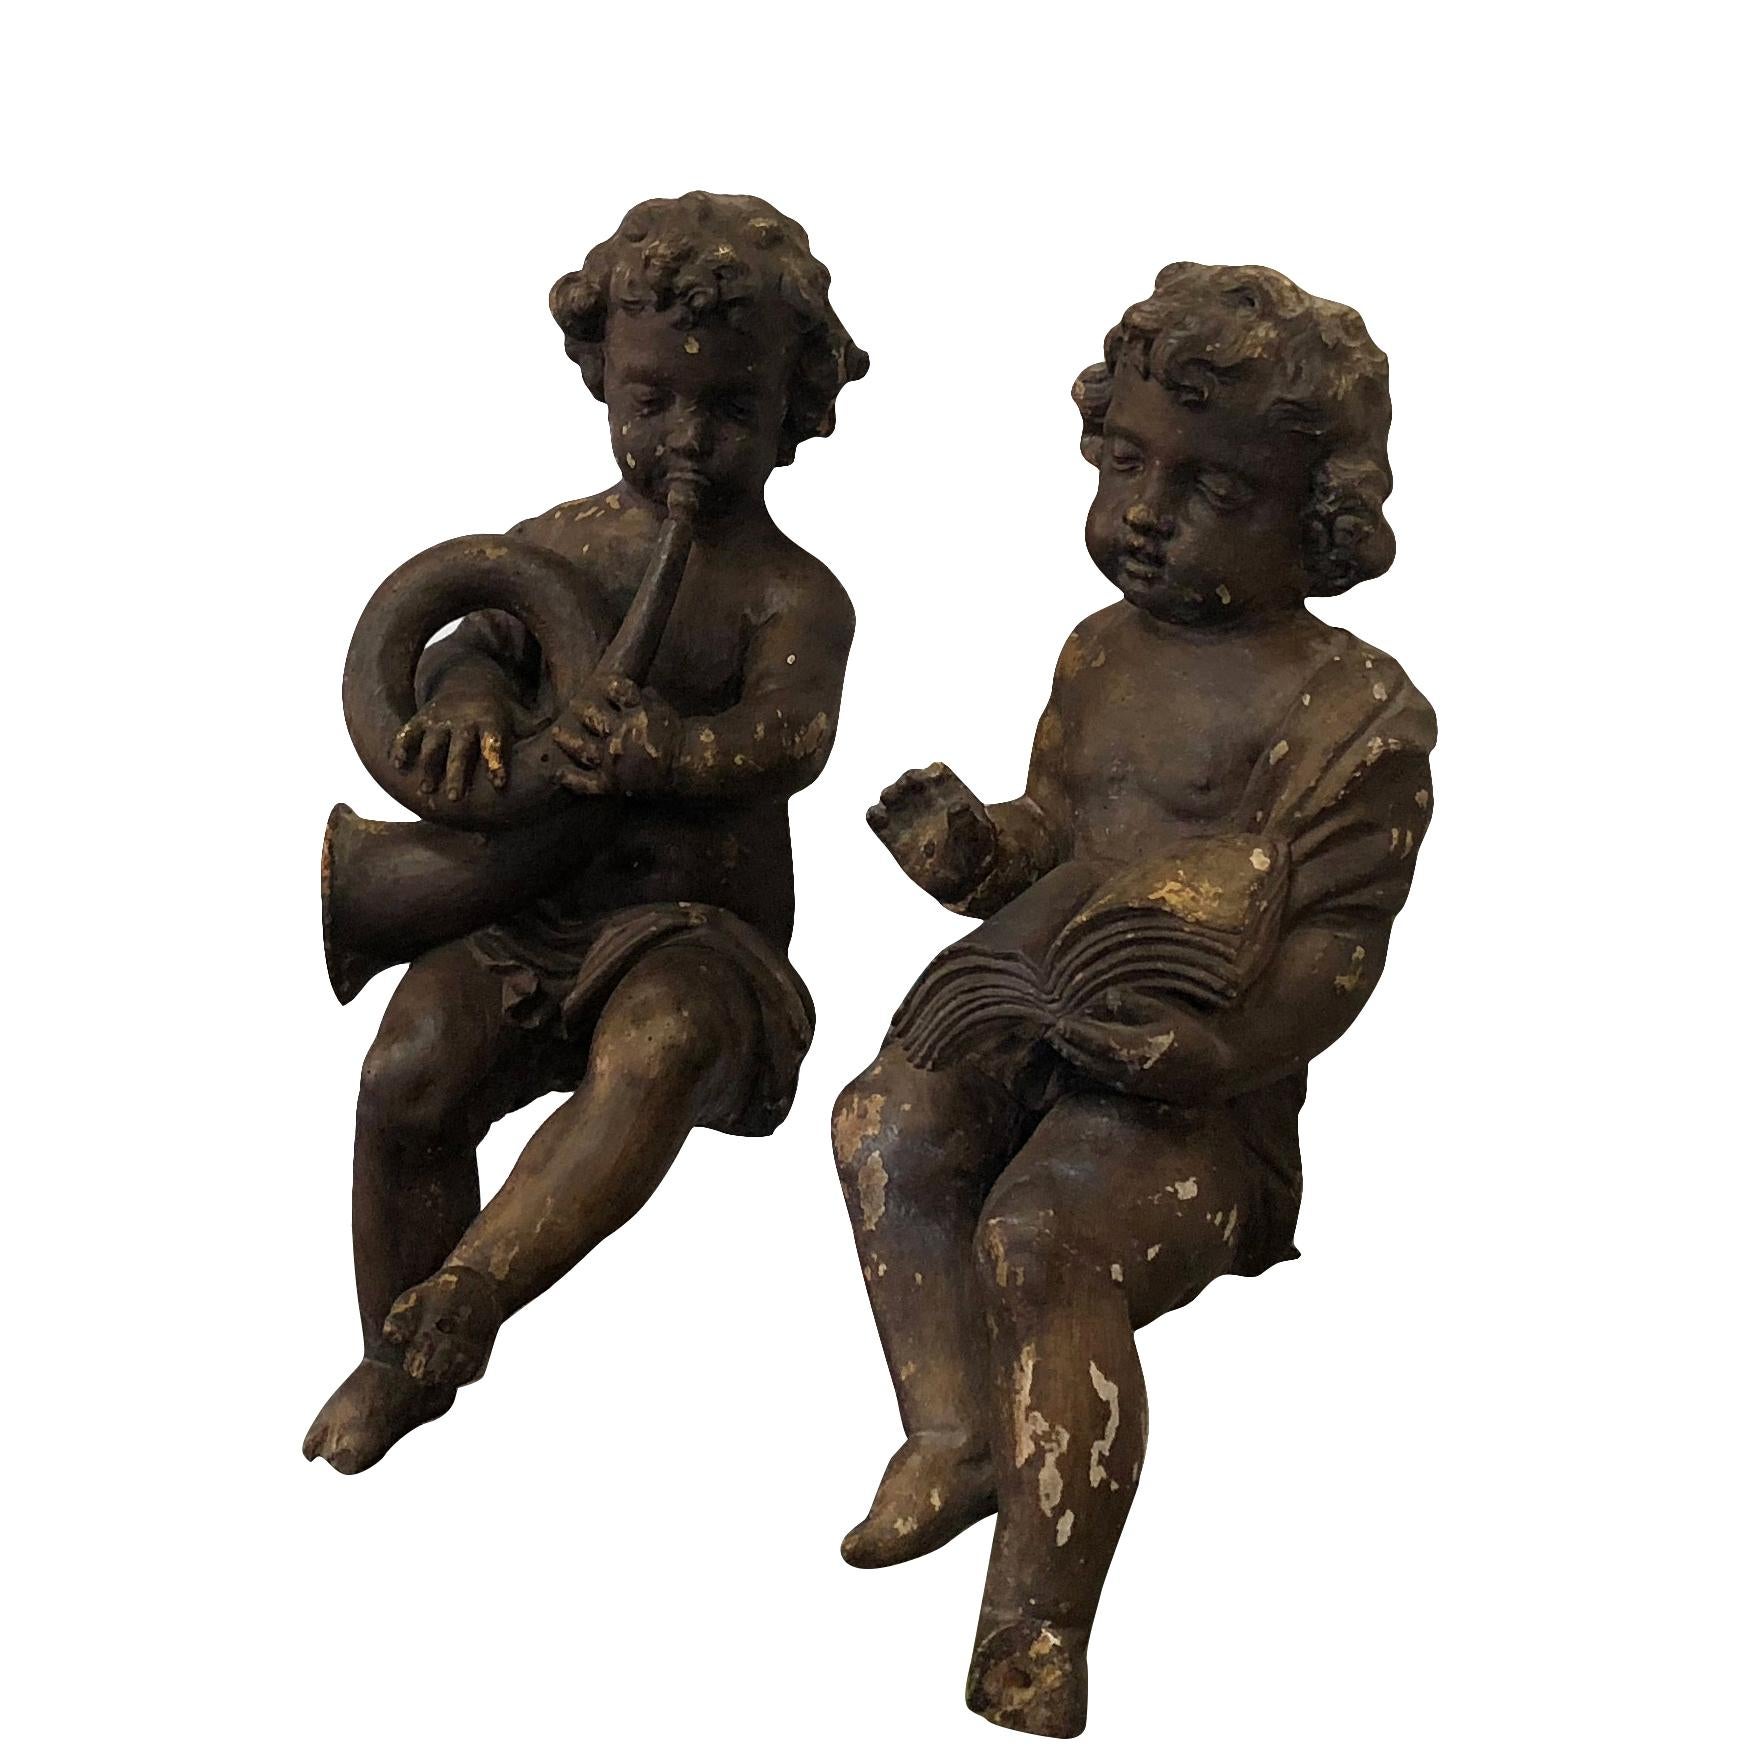 A hand carved wooden pair of French Baroque angels. The angels or “Anges” are waxed with their natural finish and were hand carved in limewood.